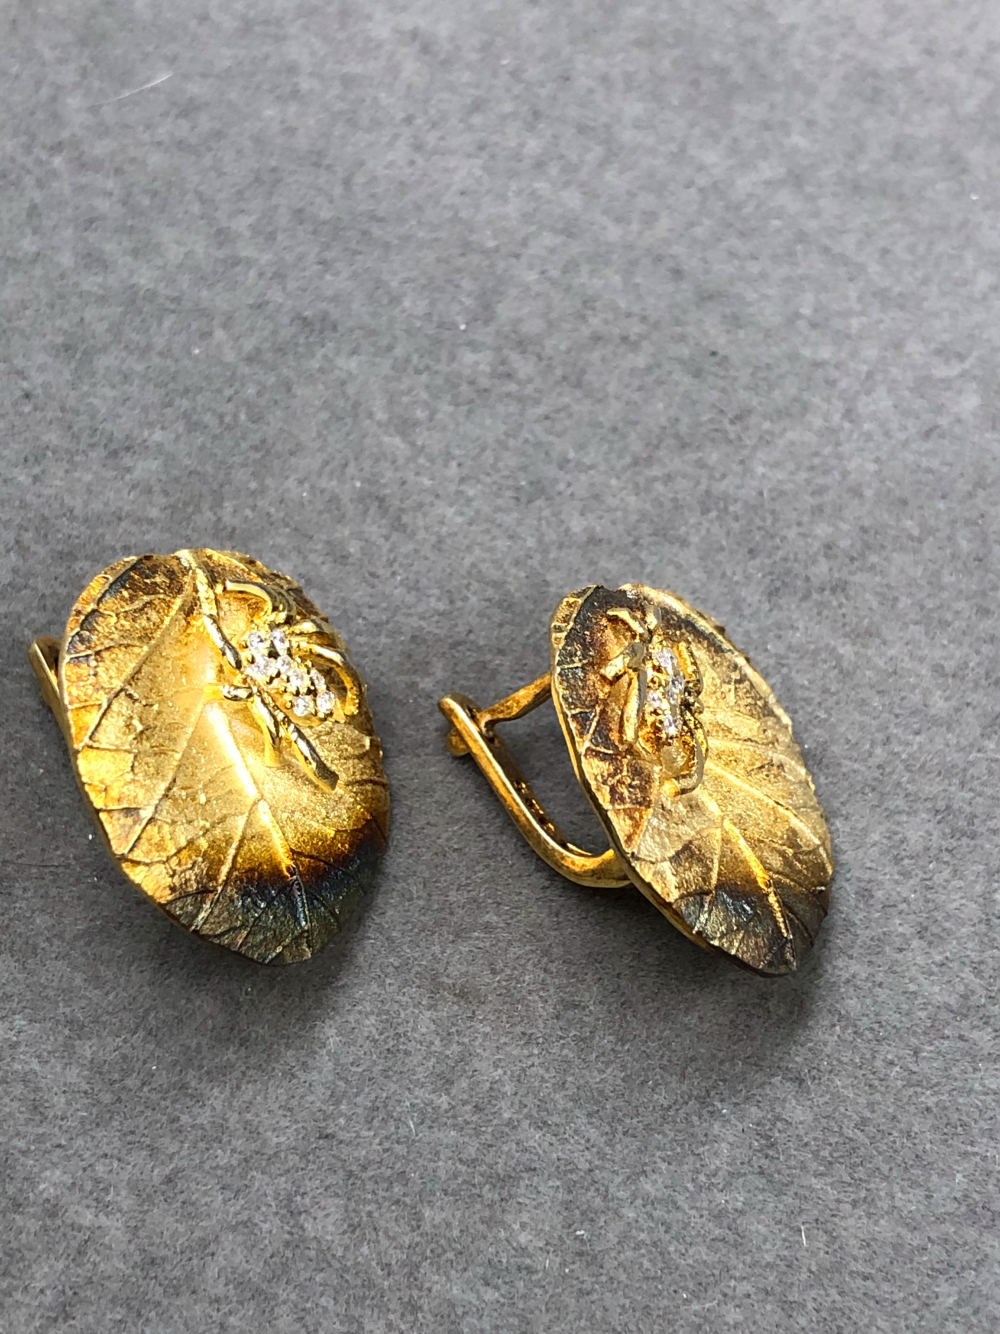 A PAIR OF FINE SILVER GILT STONE SET SPIDER CRAWLING ON BURNISHED LEAF STUD EARRINGS. DIAMETER 2cms, - Image 5 of 5